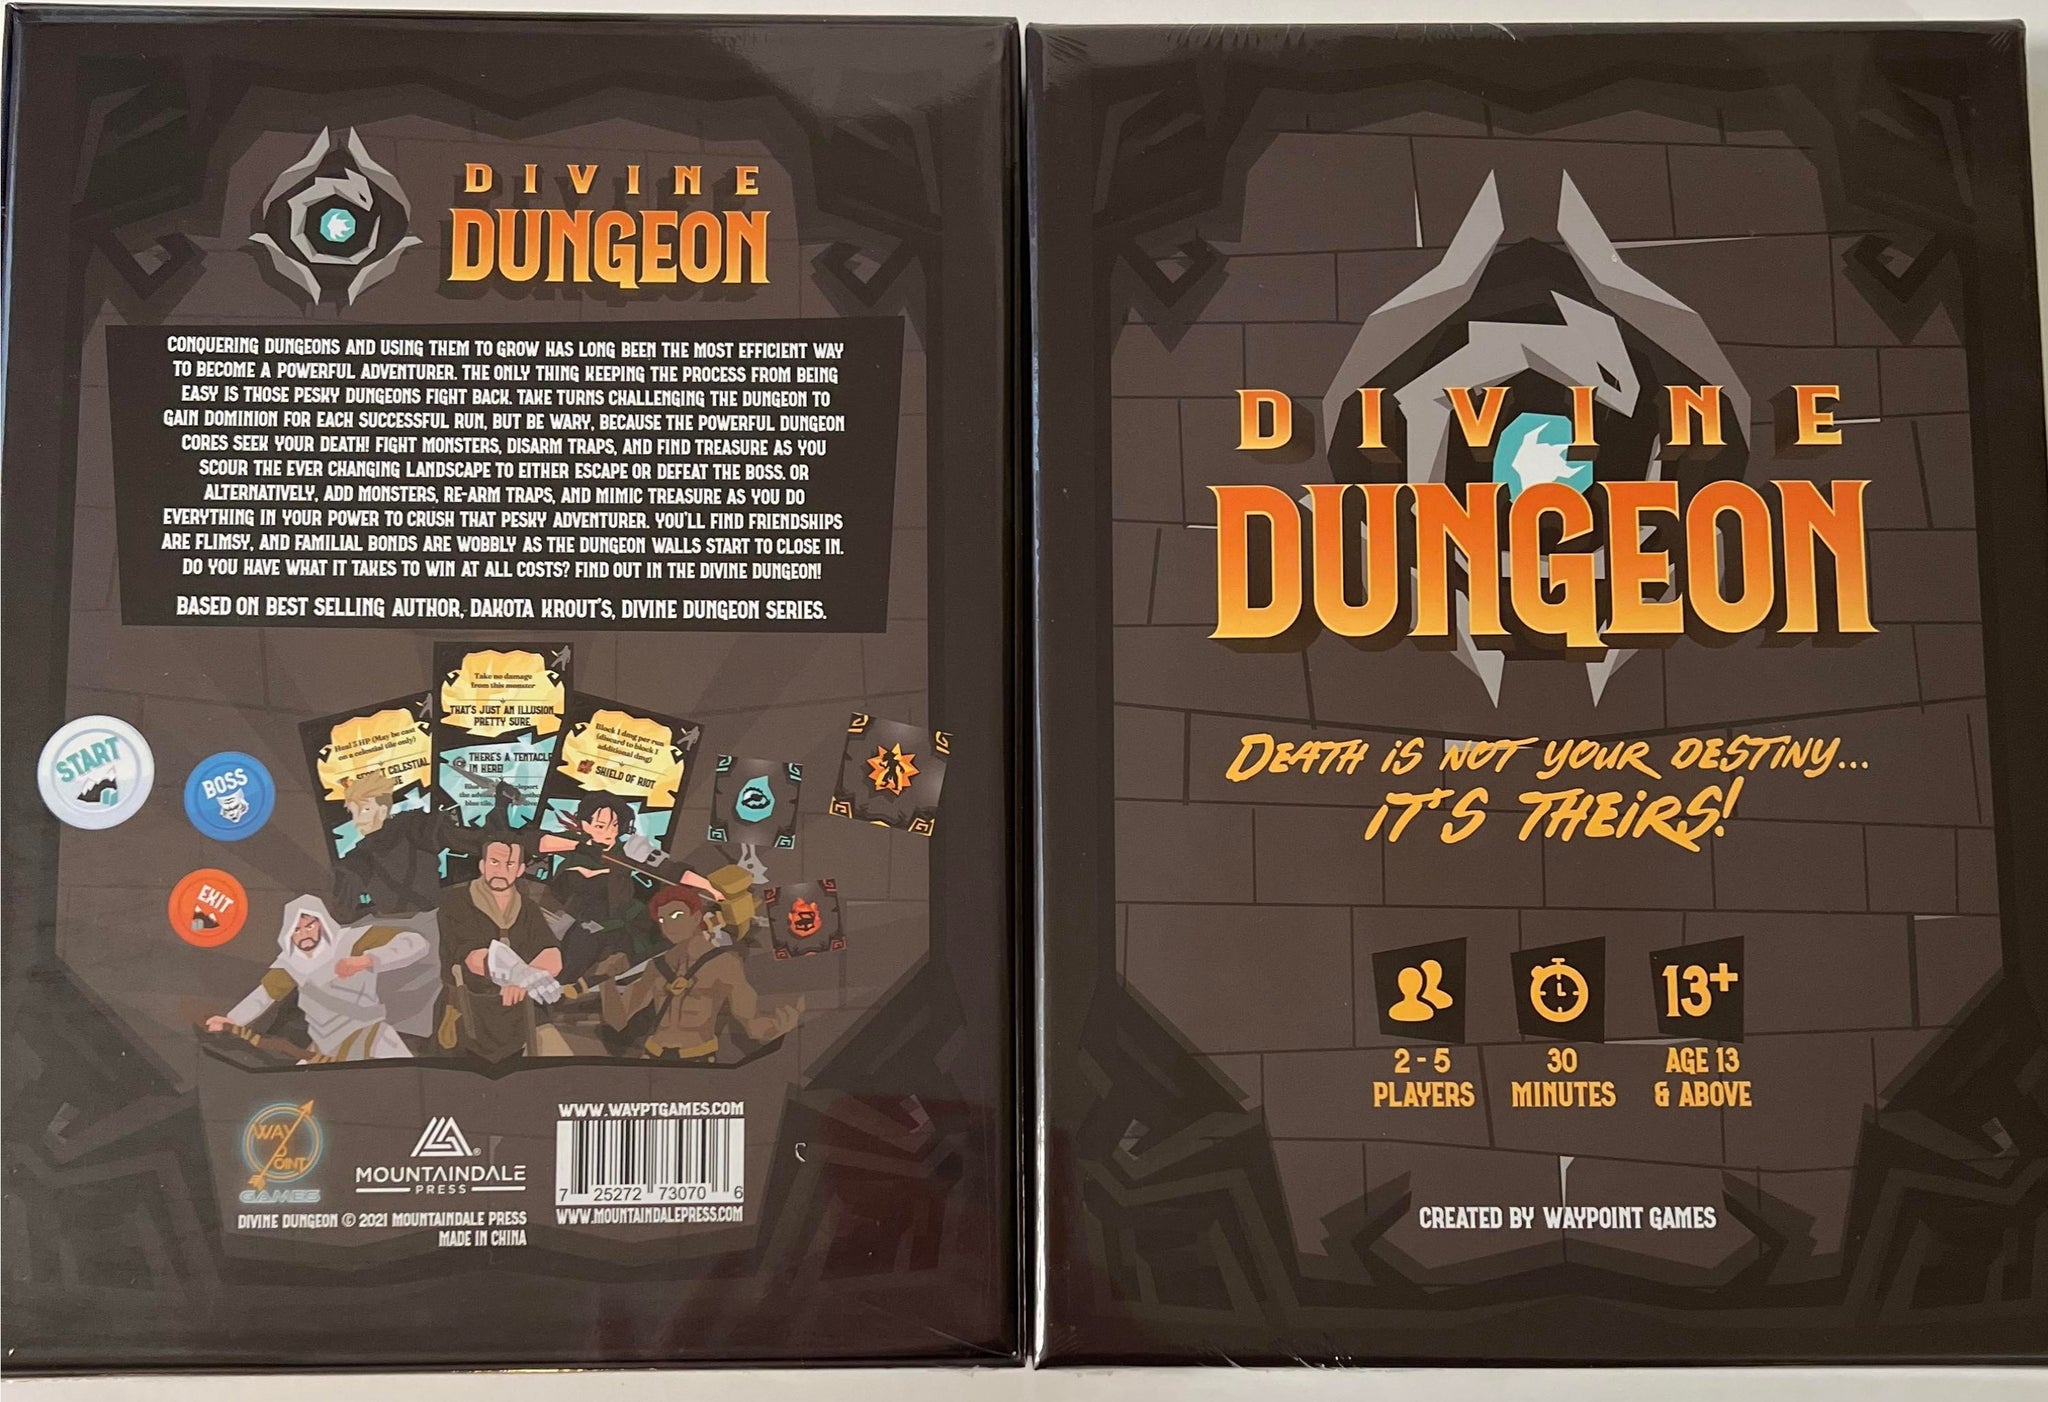 This image shows the front and back covers of the Divine Dungeon board game!